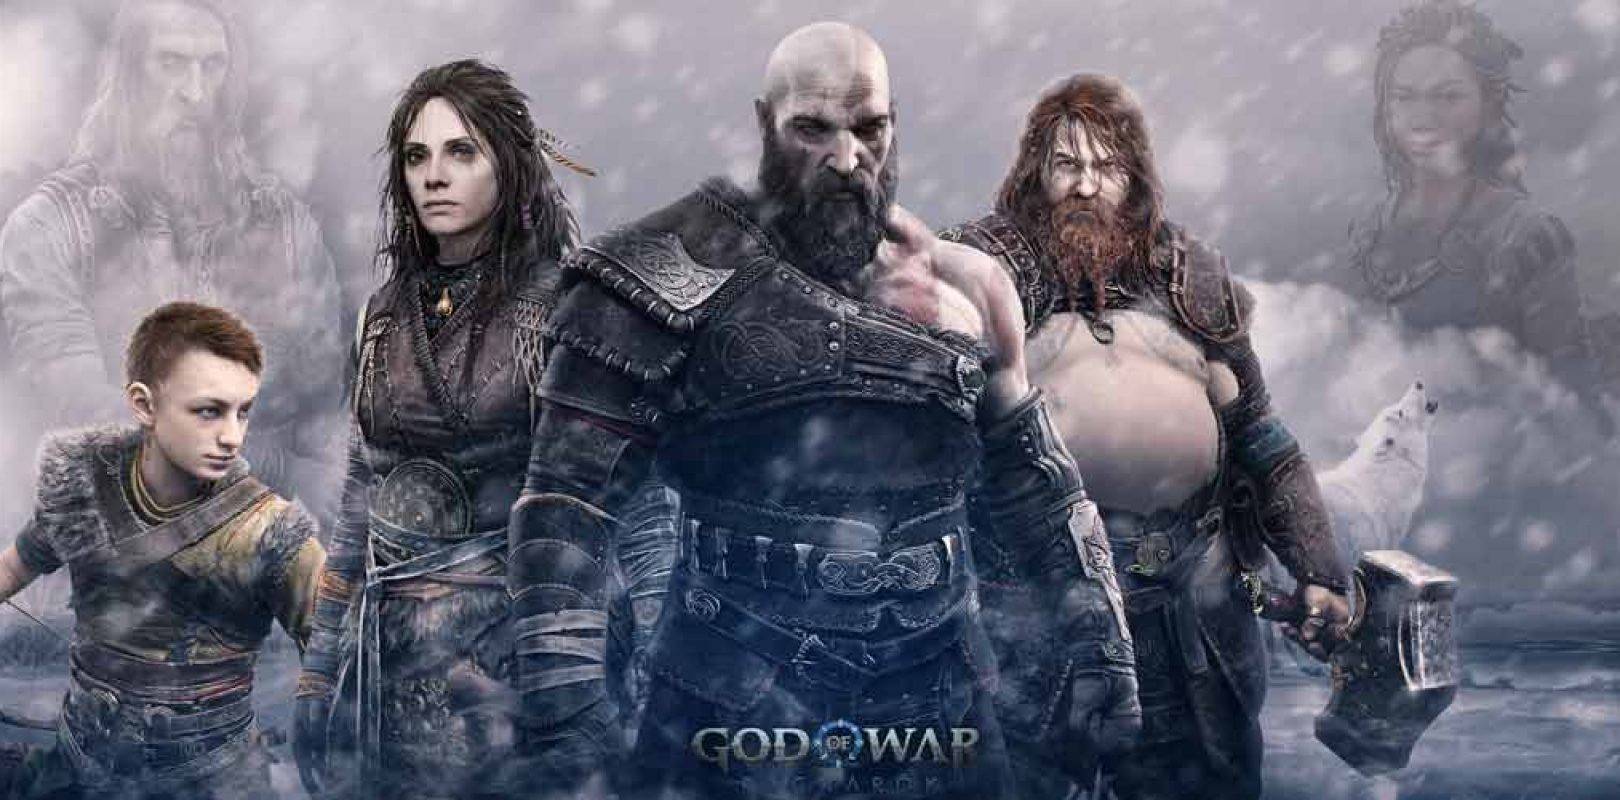 NEW GOD OF WAR RAGNAROK (PC DOWNLOAD CODE) - NO DVD/CD (FULL EDITION) Price  in India - Buy NEW GOD OF WAR RAGNAROK (PC DOWNLOAD CODE) - NO DVD/CD (FULL  EDITION) online